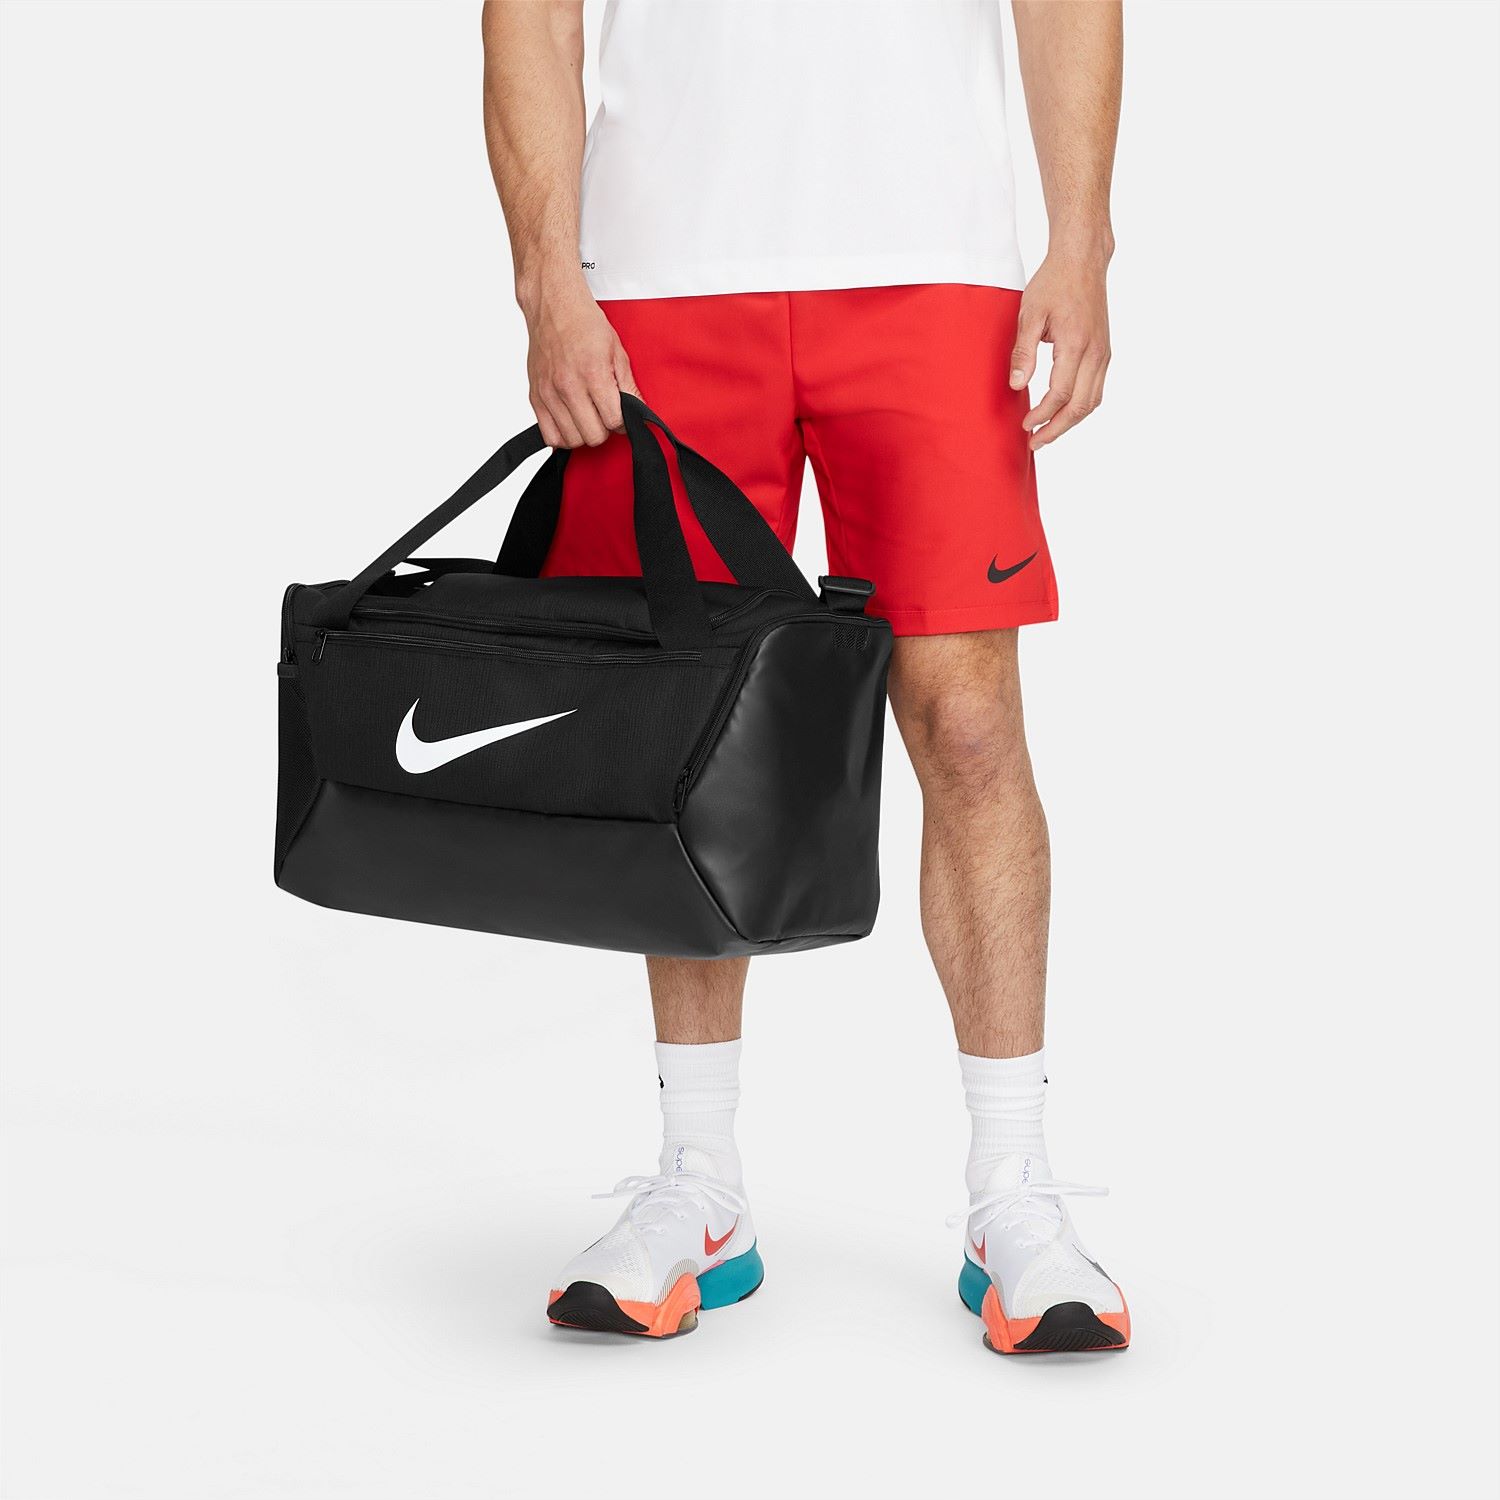 Nike Sportswear Cambodia - Nike Brasilia Convertible Duffel Bag/Backpack  features a spacious main compartment for all the gear you need to get  through the day prepared. Versatile straps let you wear it